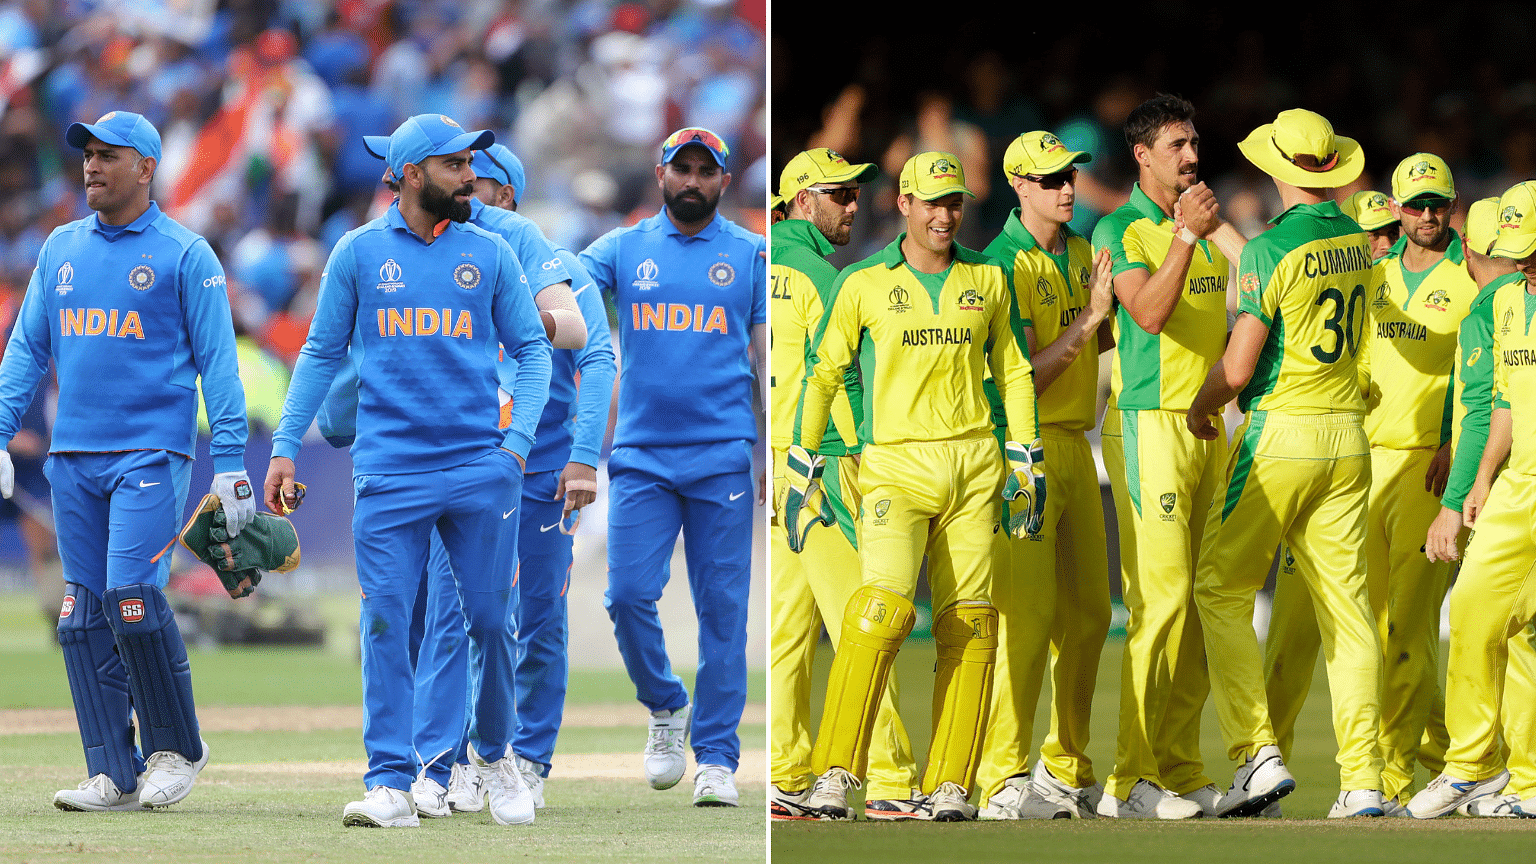 Currently, Australia lead the points table with 14 points while India are second with 13 points.